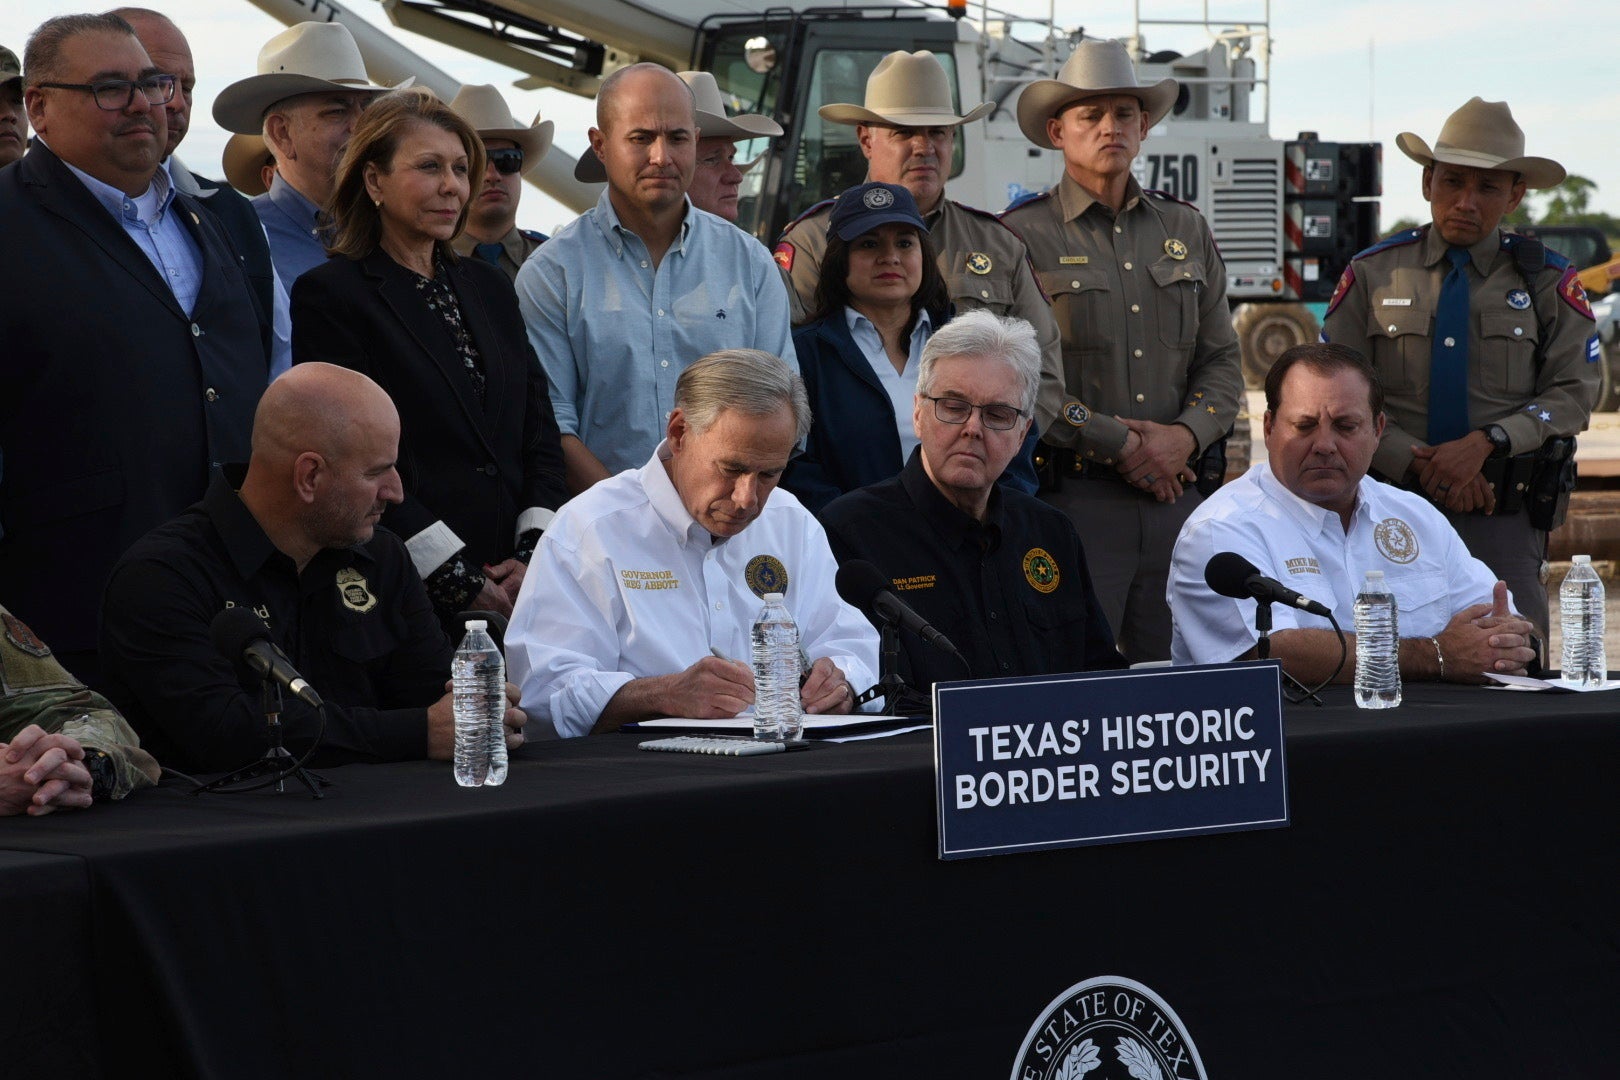 Gov. Greg Abbott signs three bills into law at a border wall construction site in Brownsville, Texas on 18 December that aims to deter illegal immigration